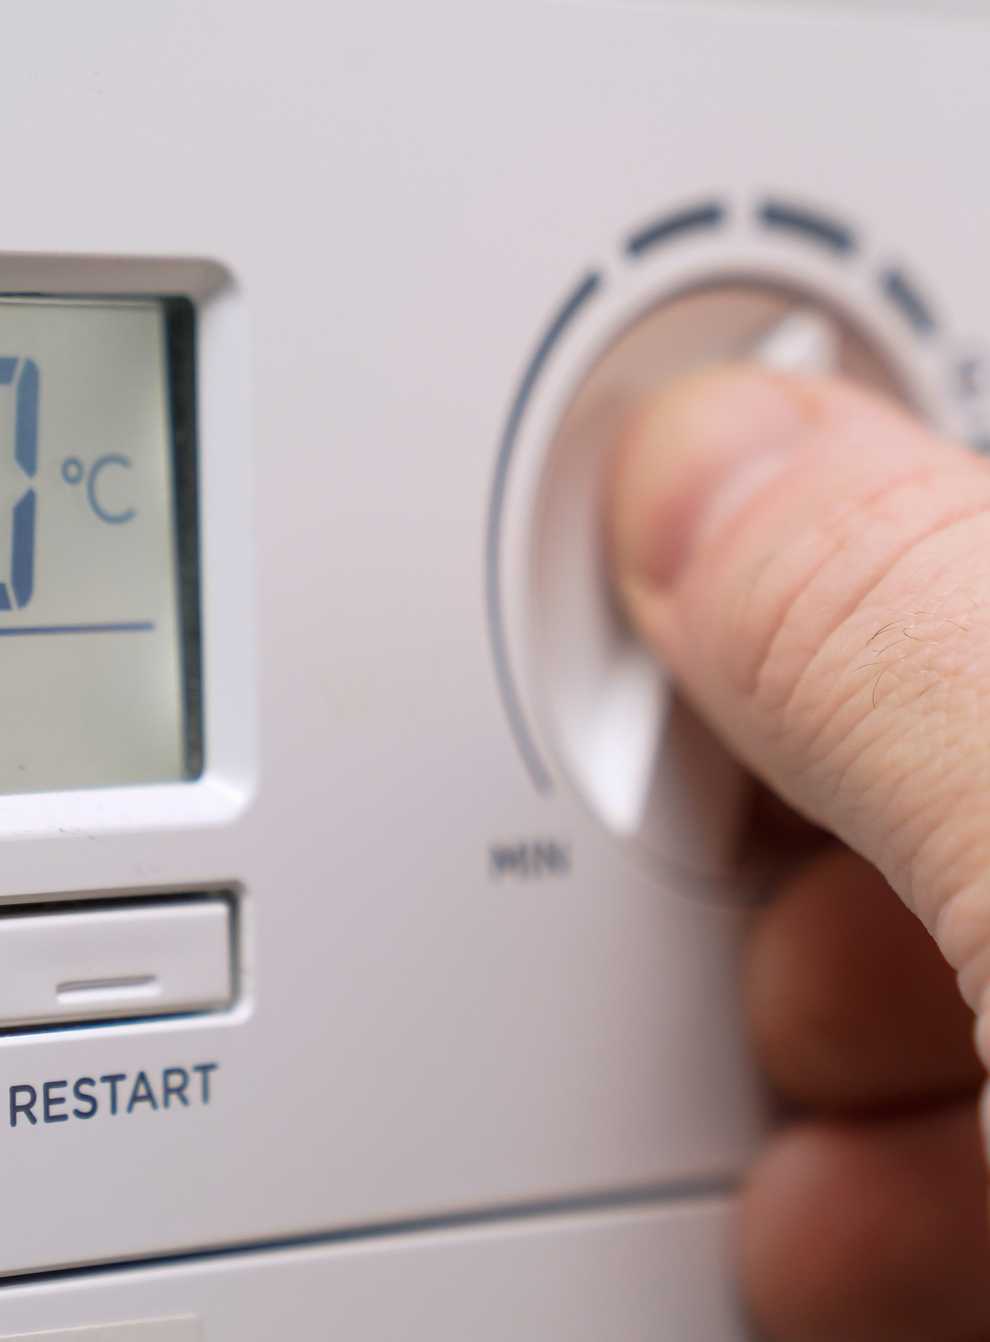 UK households will receive a £400 discount on their energy bills this year (Andrew Matthews/PA)